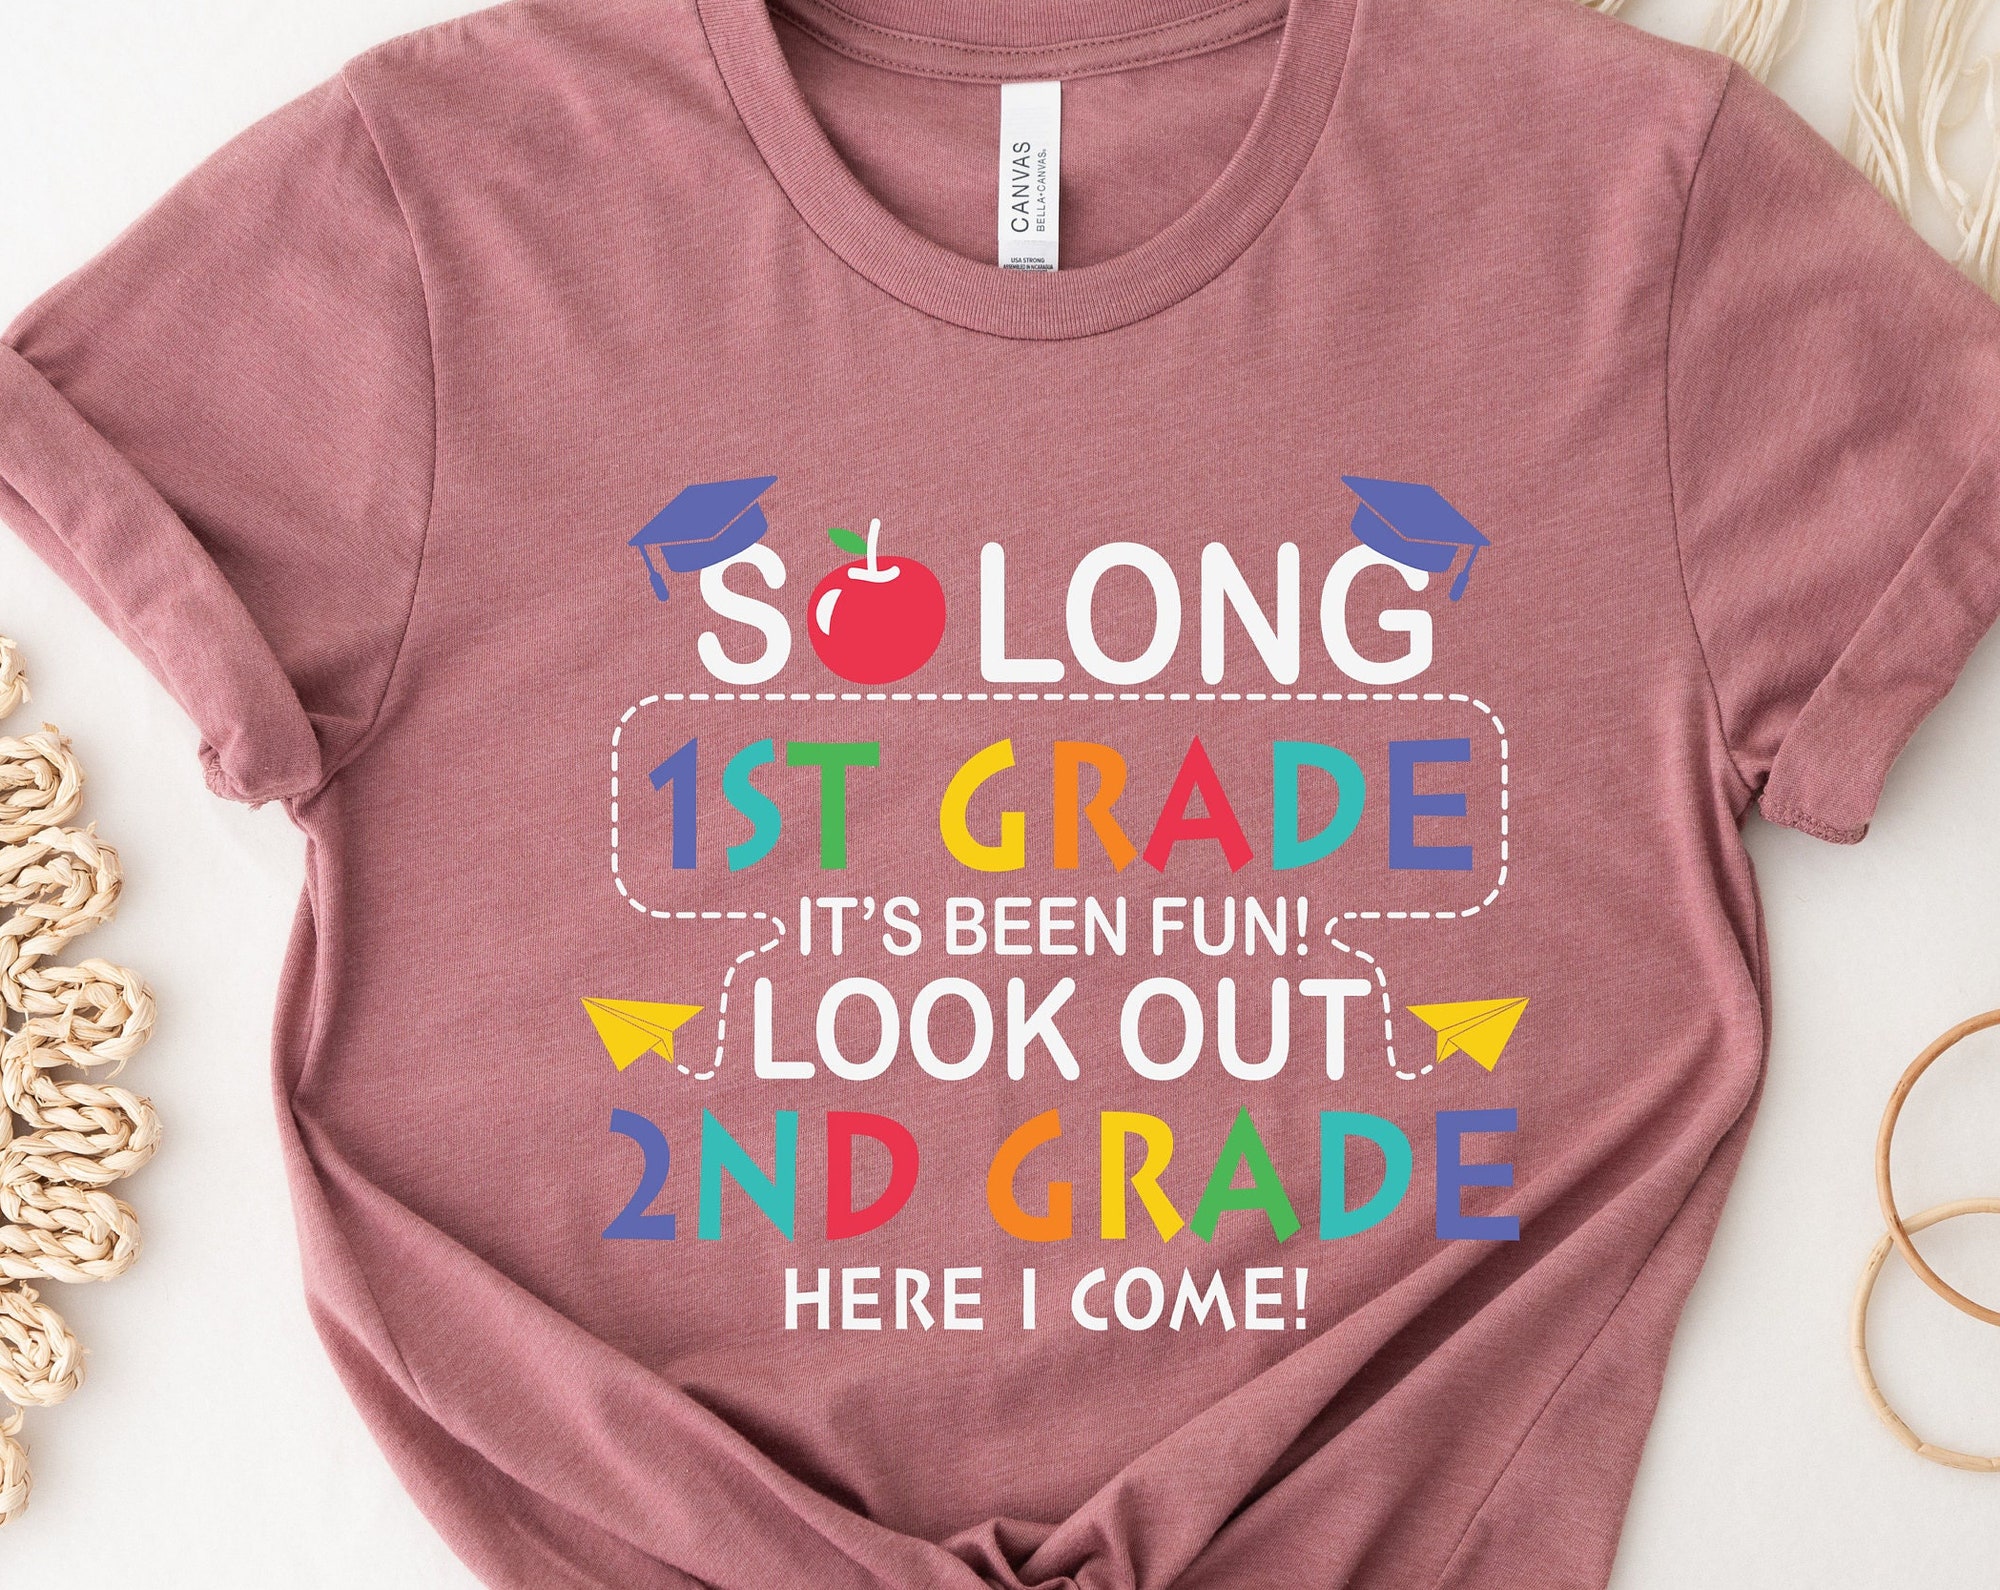 Discover So Long 1st Grade It's Been Fun!Look Out 2nd Grade Here I Come Shirt